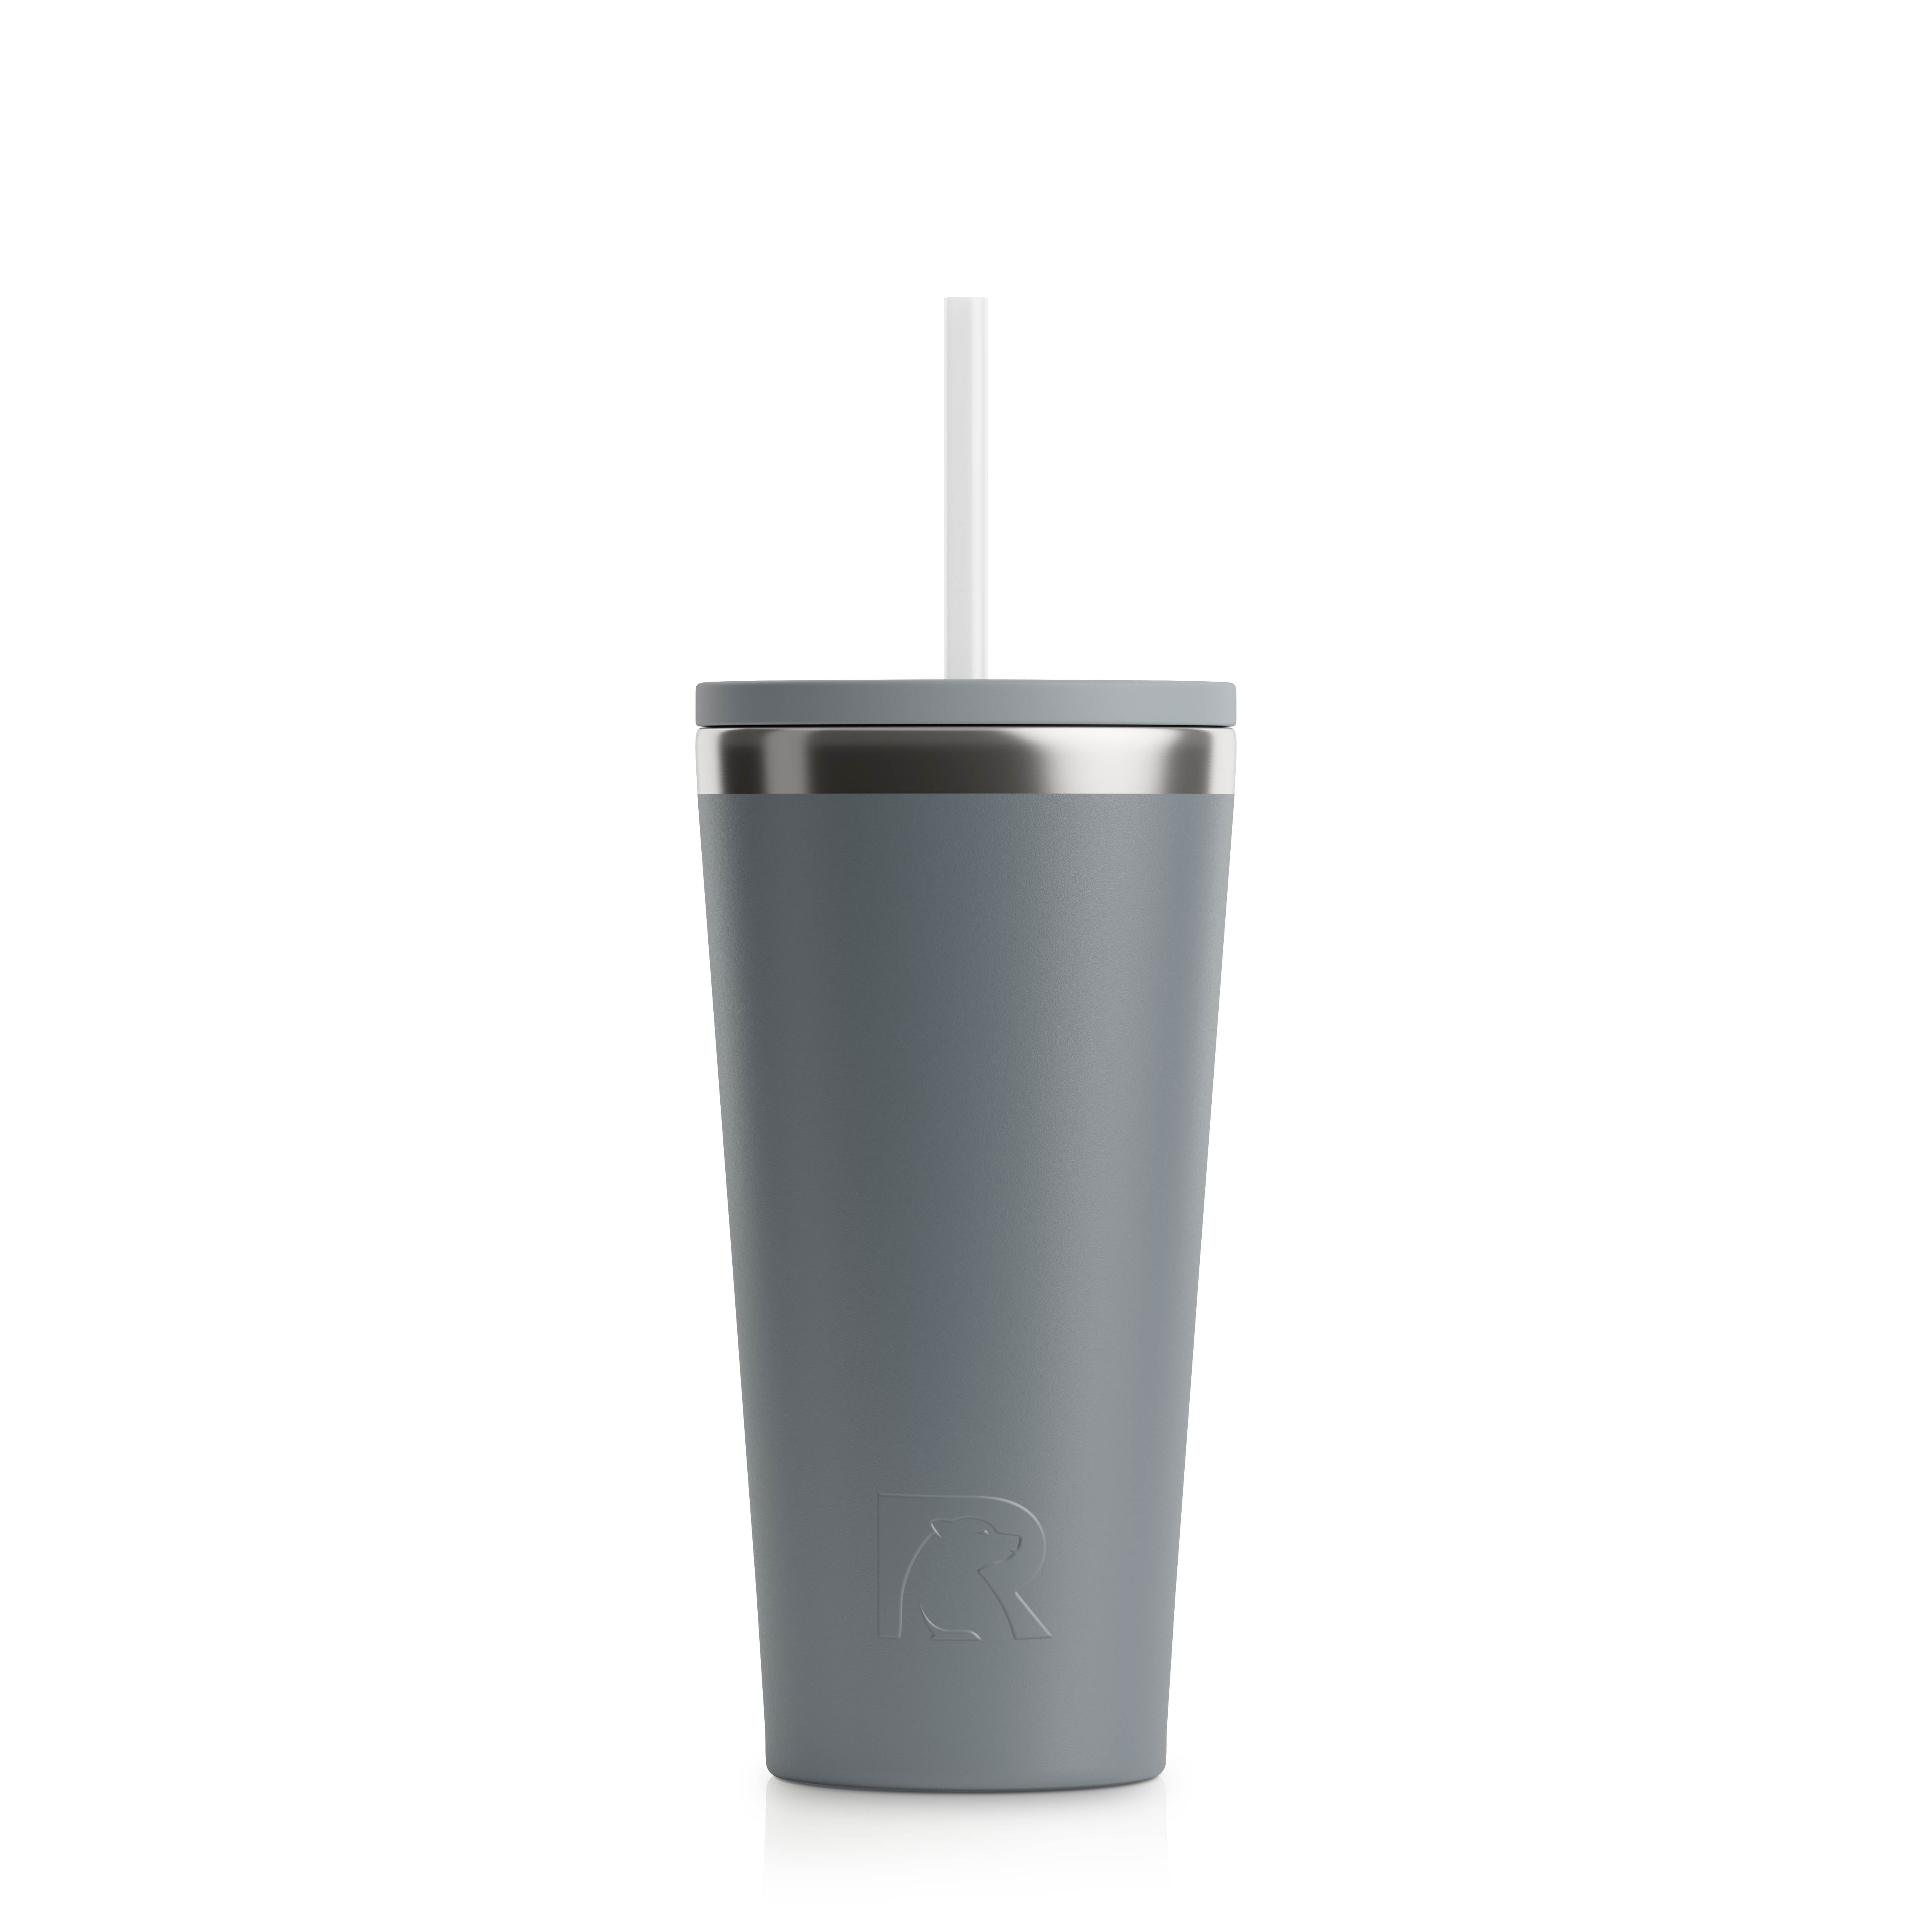 Alfoni 24oz Insulated Tumbler with Lid & Metal Straw Double Wall Stainless Steel|Hot Cold Drink|Beach Travel Mug Reusable Smoothie Iced Coffee Cup